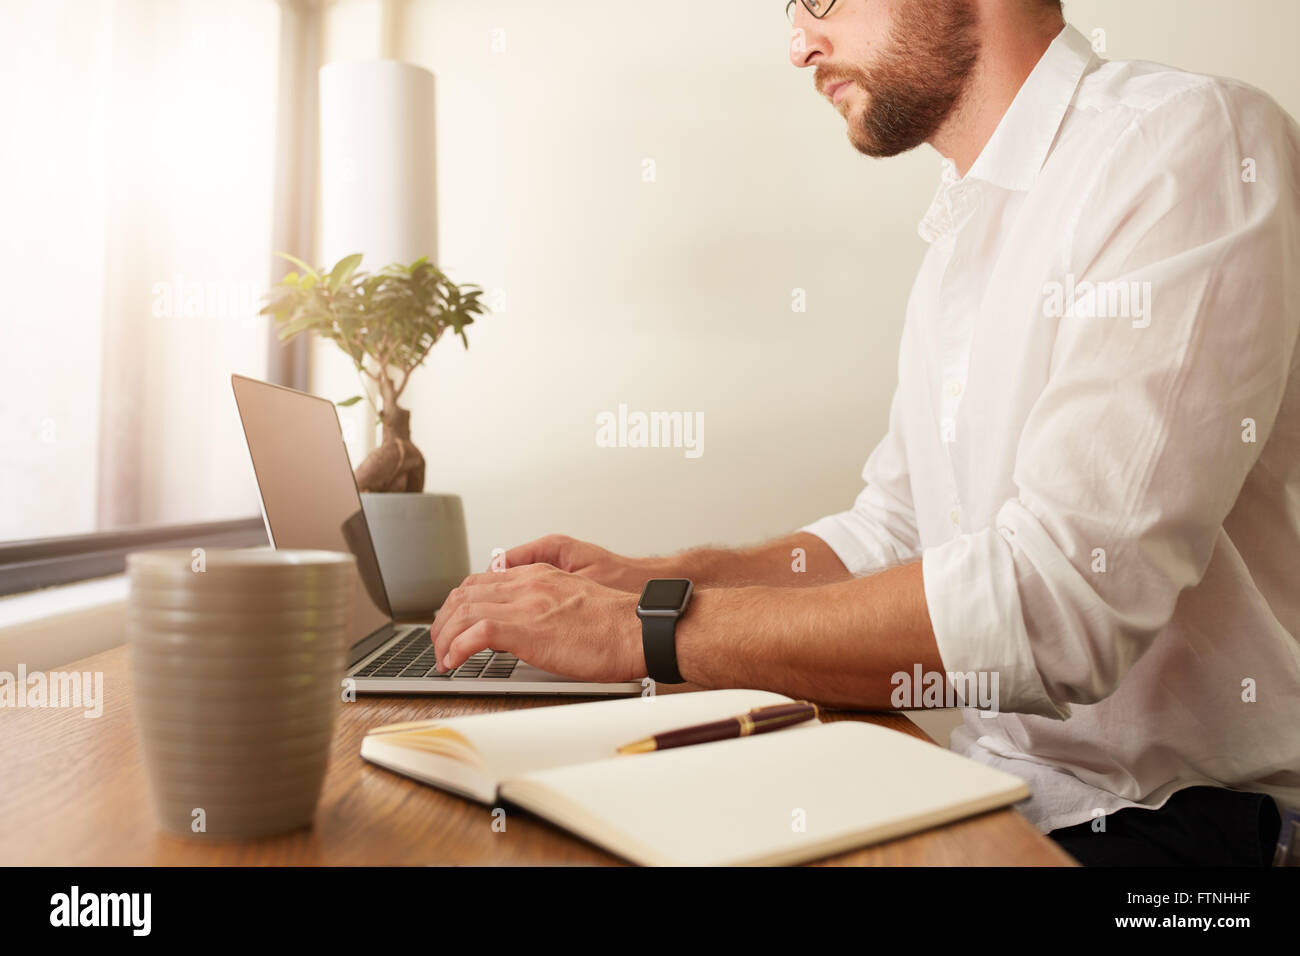 Cropped image of businessman working on laptop. Man working from home office. Stock Photo